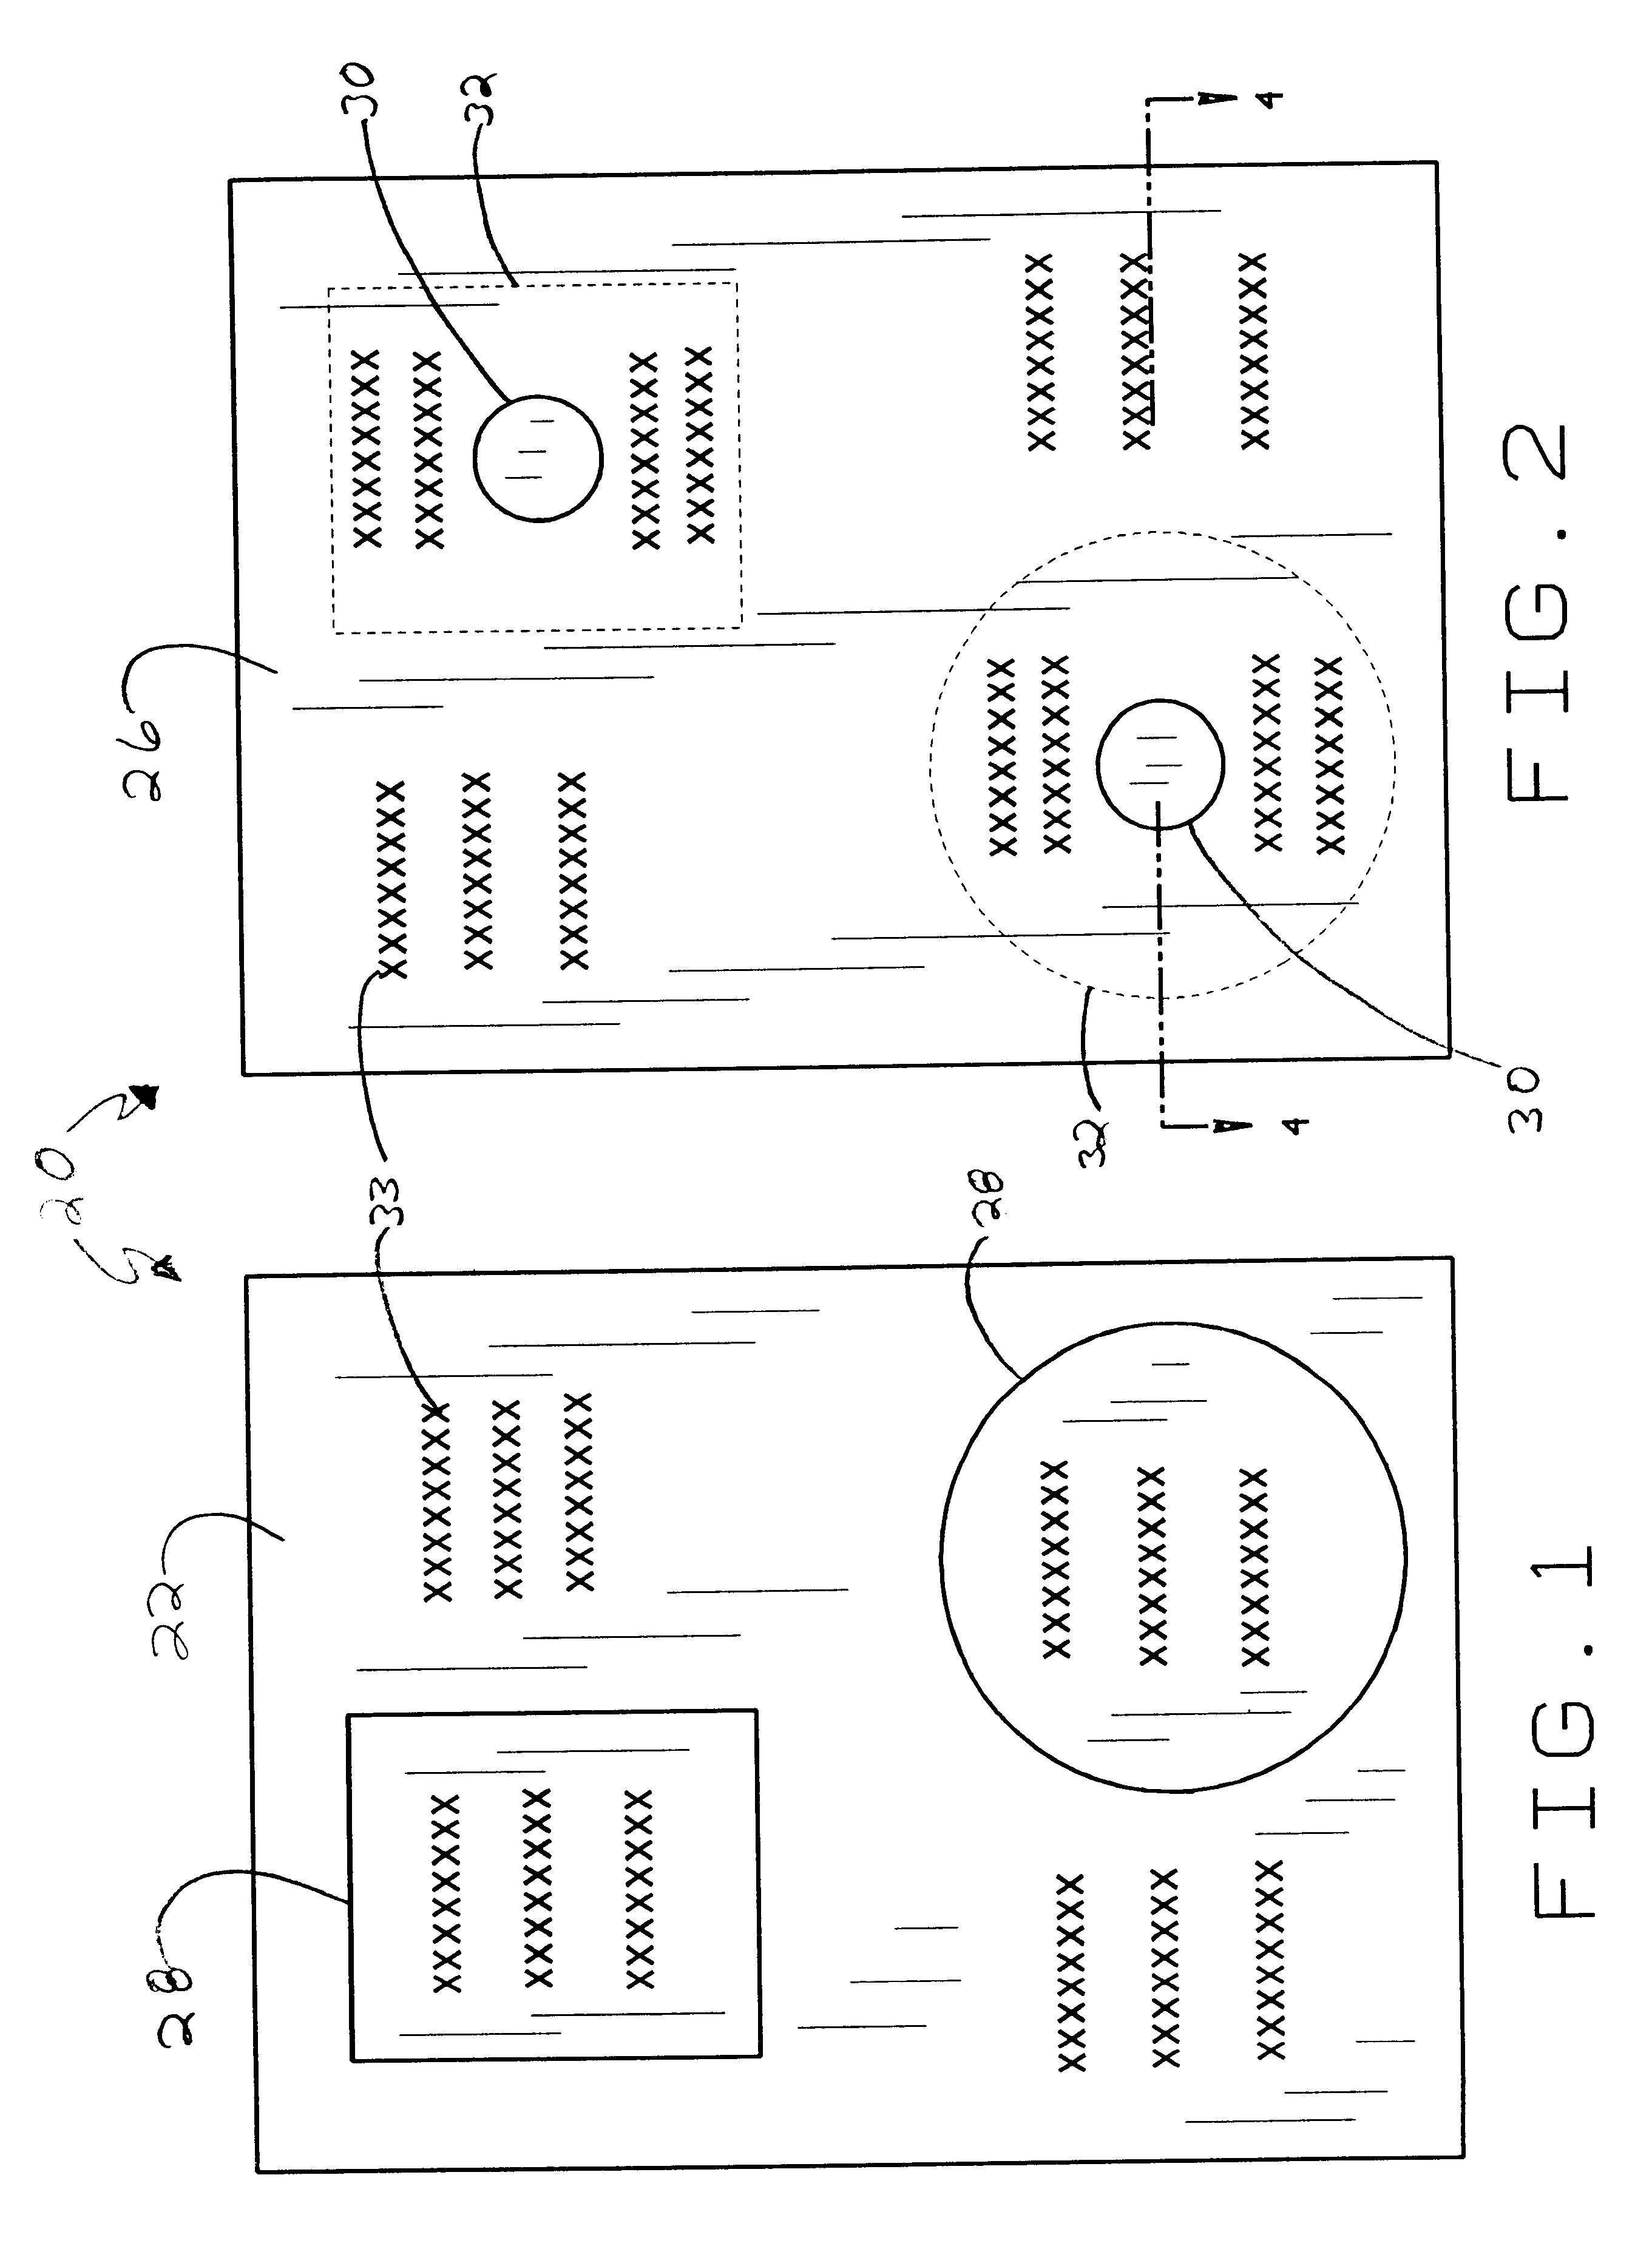 Laminate with integrated compact disk label and methods